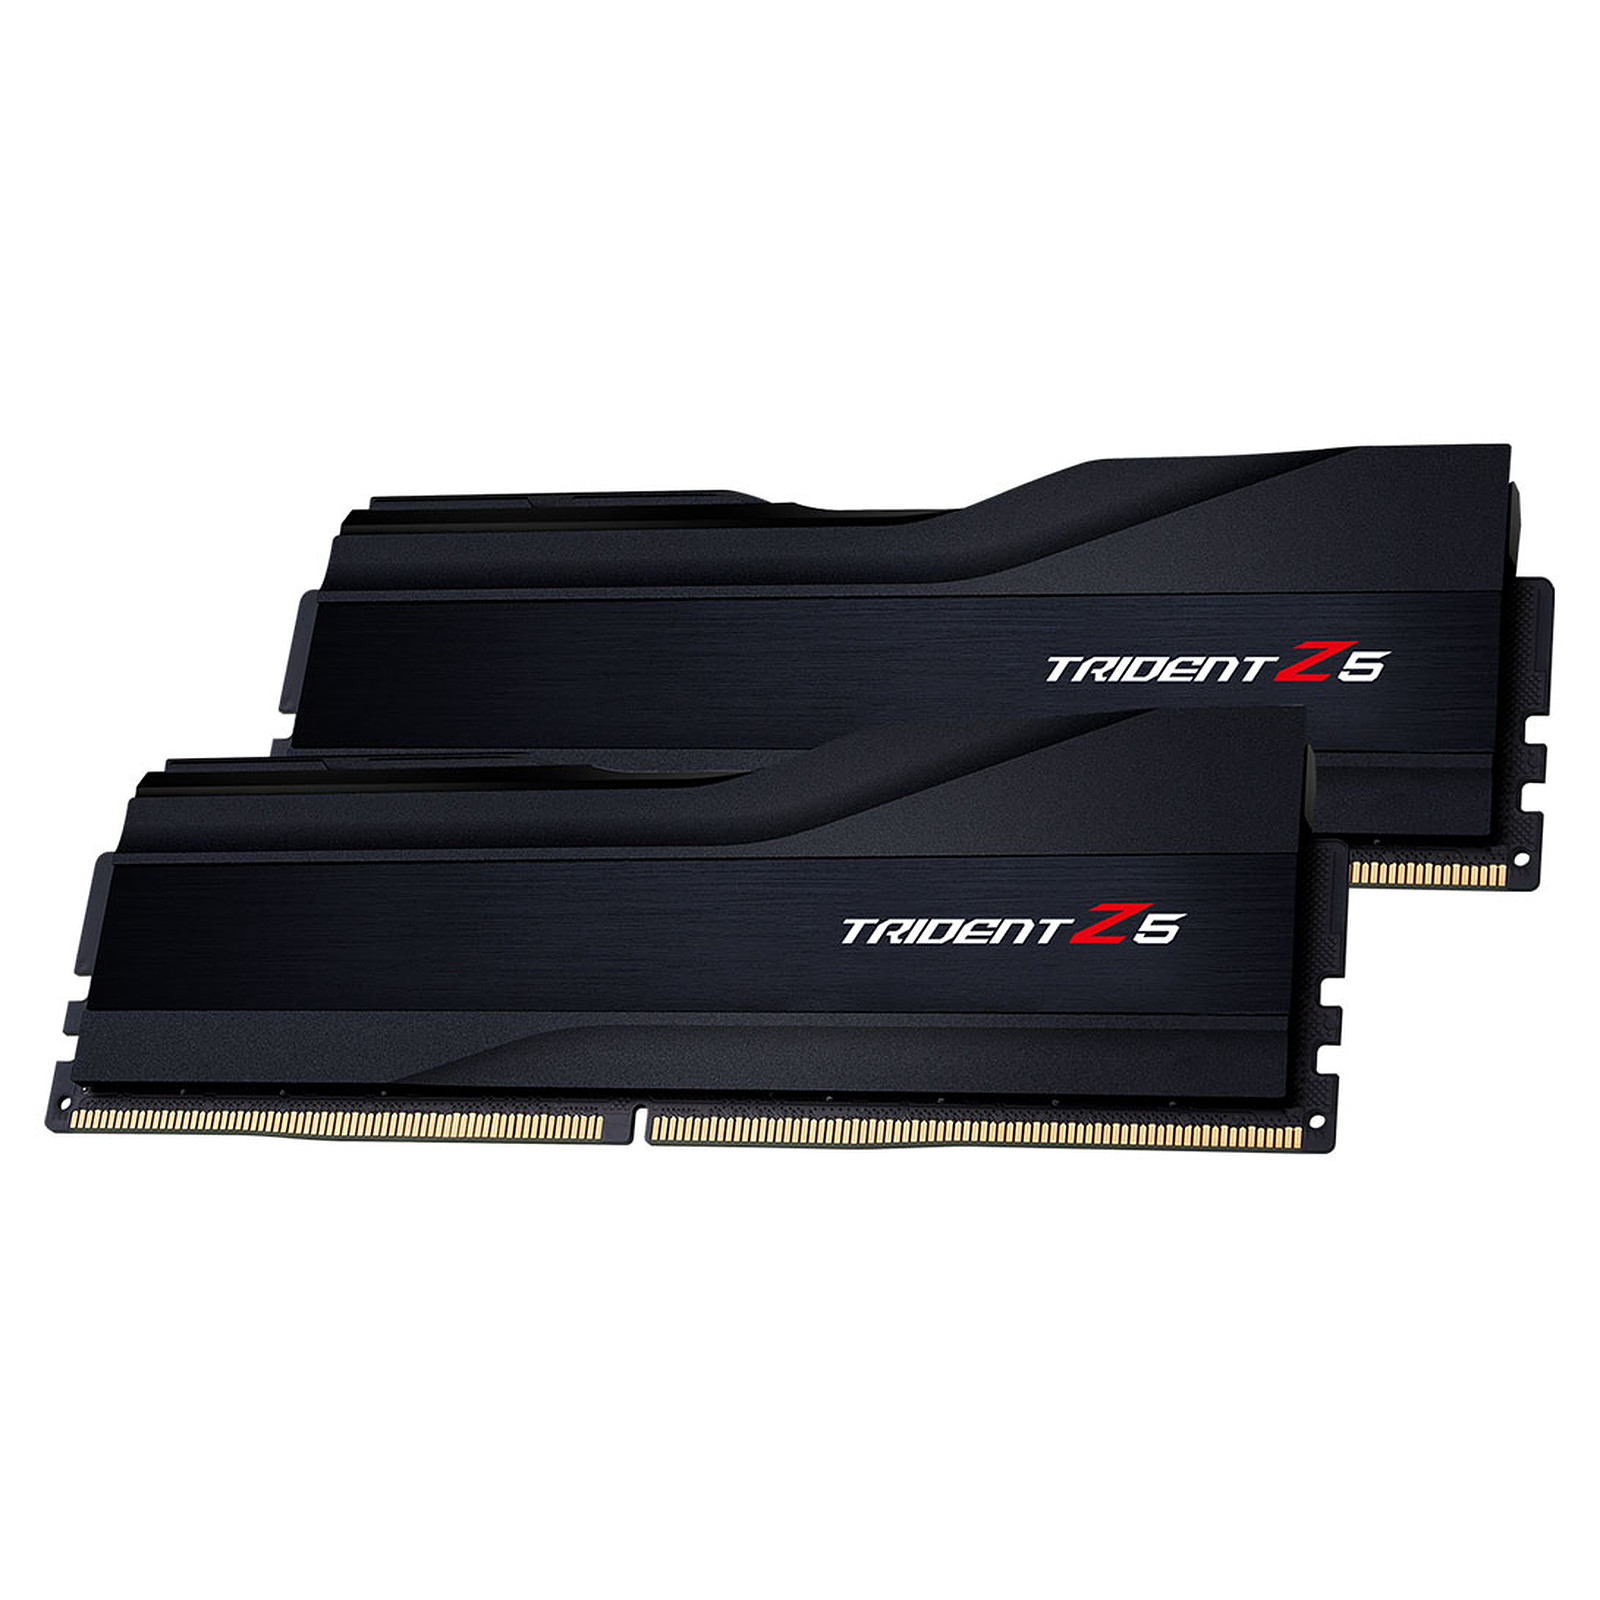 G.Skill Trident Z5 32 Go (2 x 16 Go) DDR5 5600 MHz CL36 - Noir · Occasion - Memoire PC G.Skill - Occasion